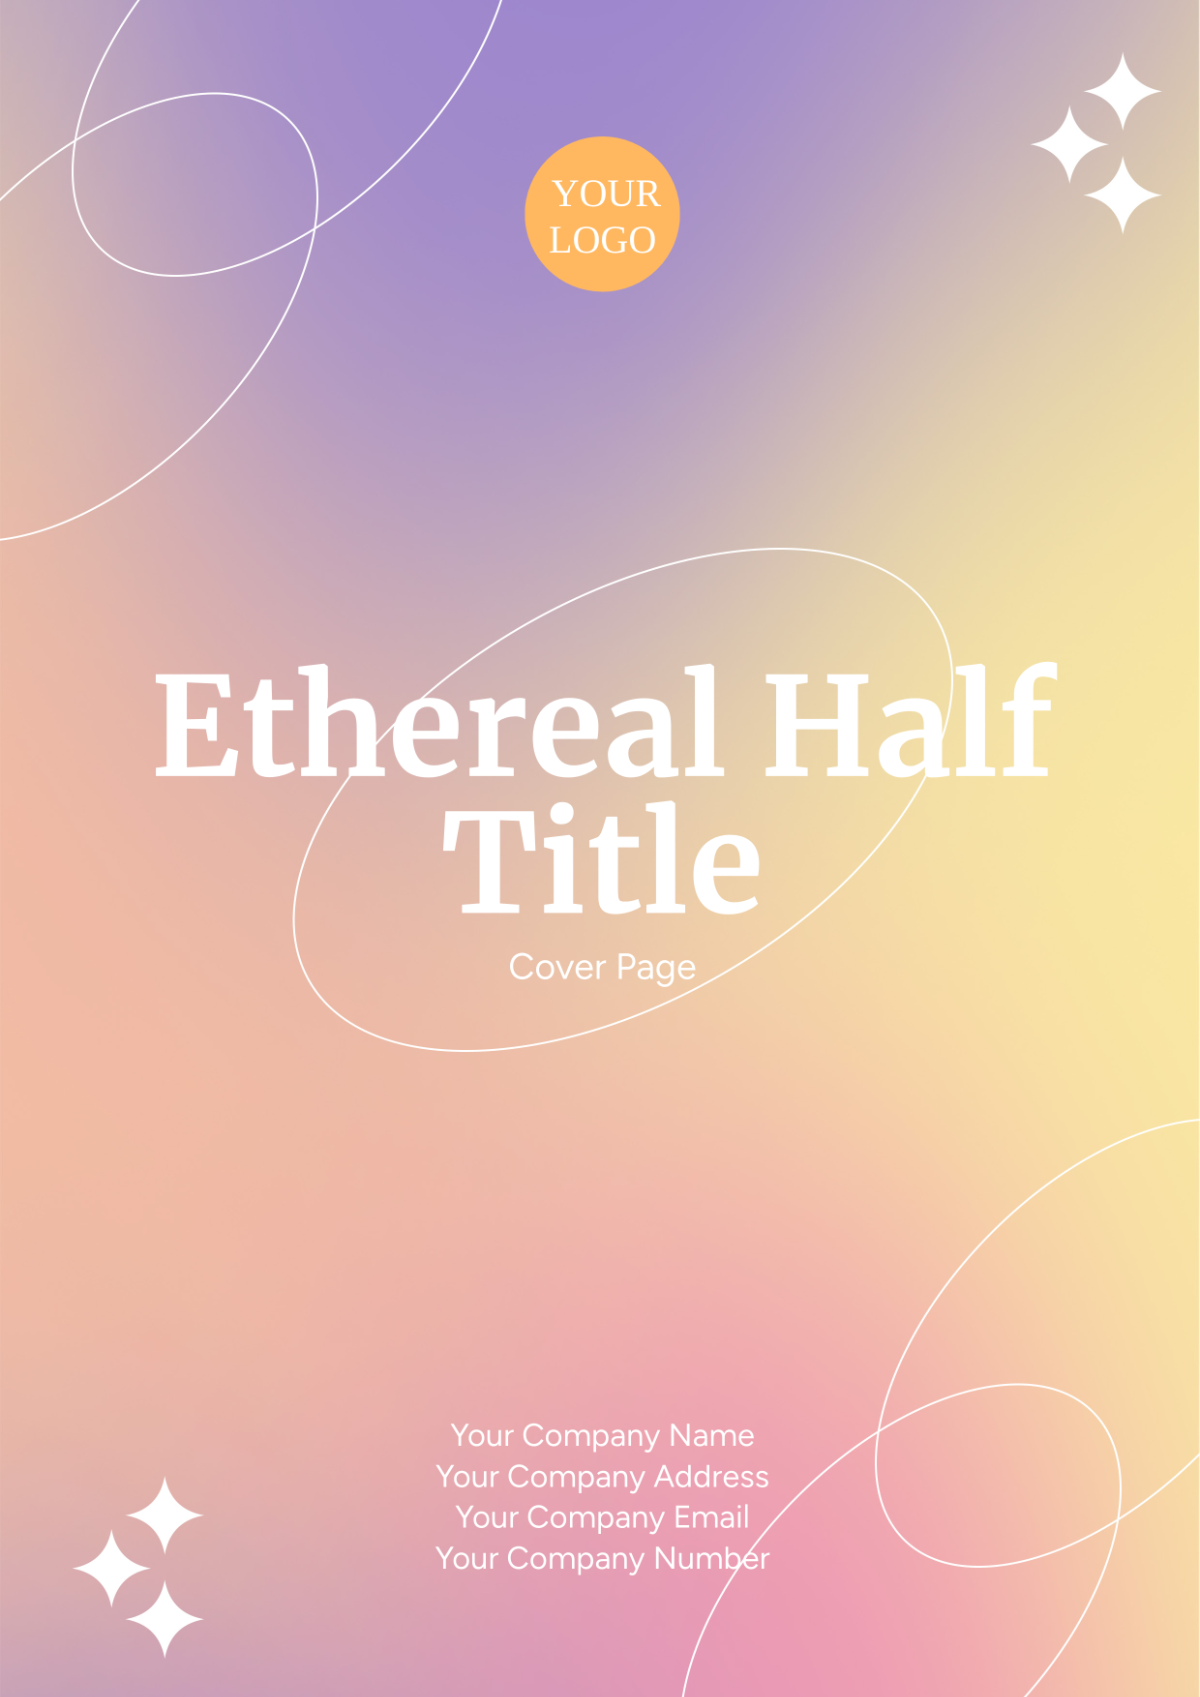 Ethereal Half Title Cover Page